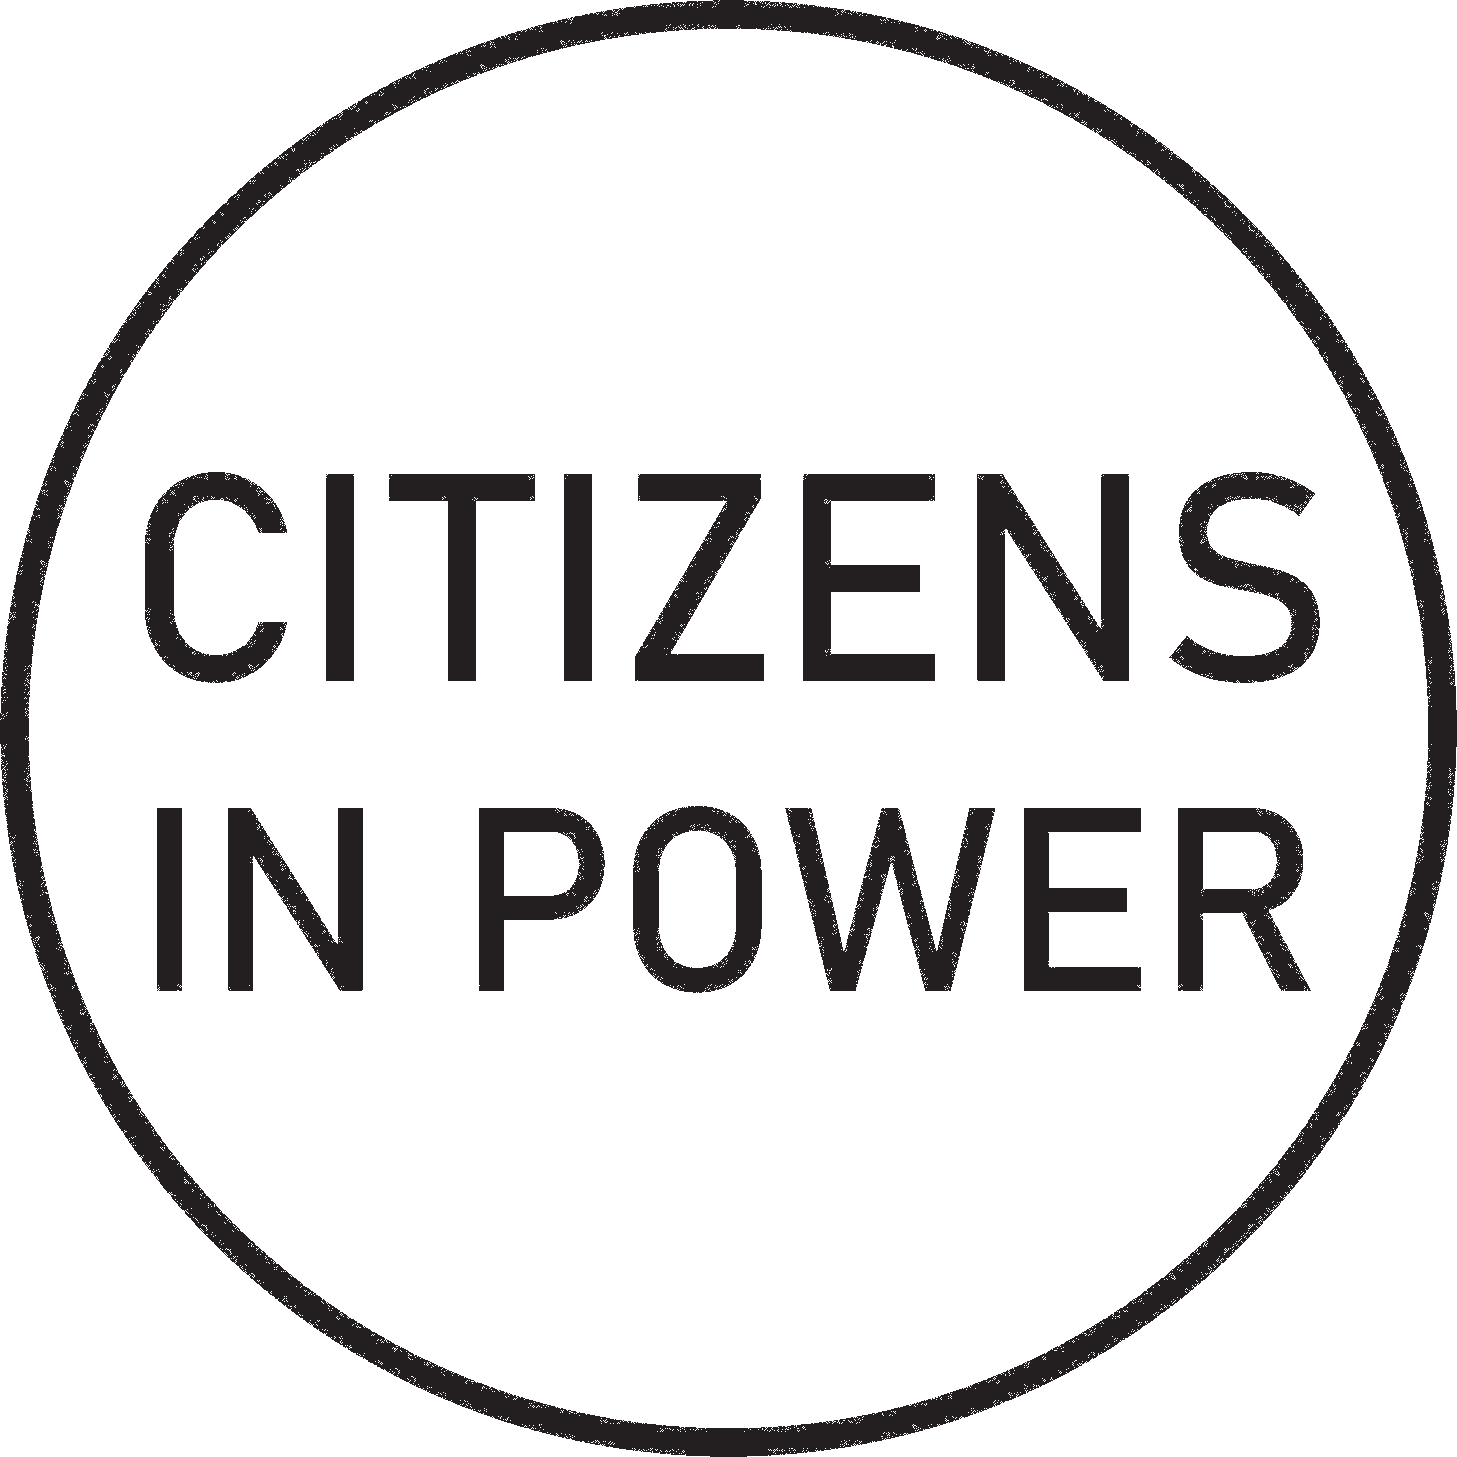 Citizens in Power